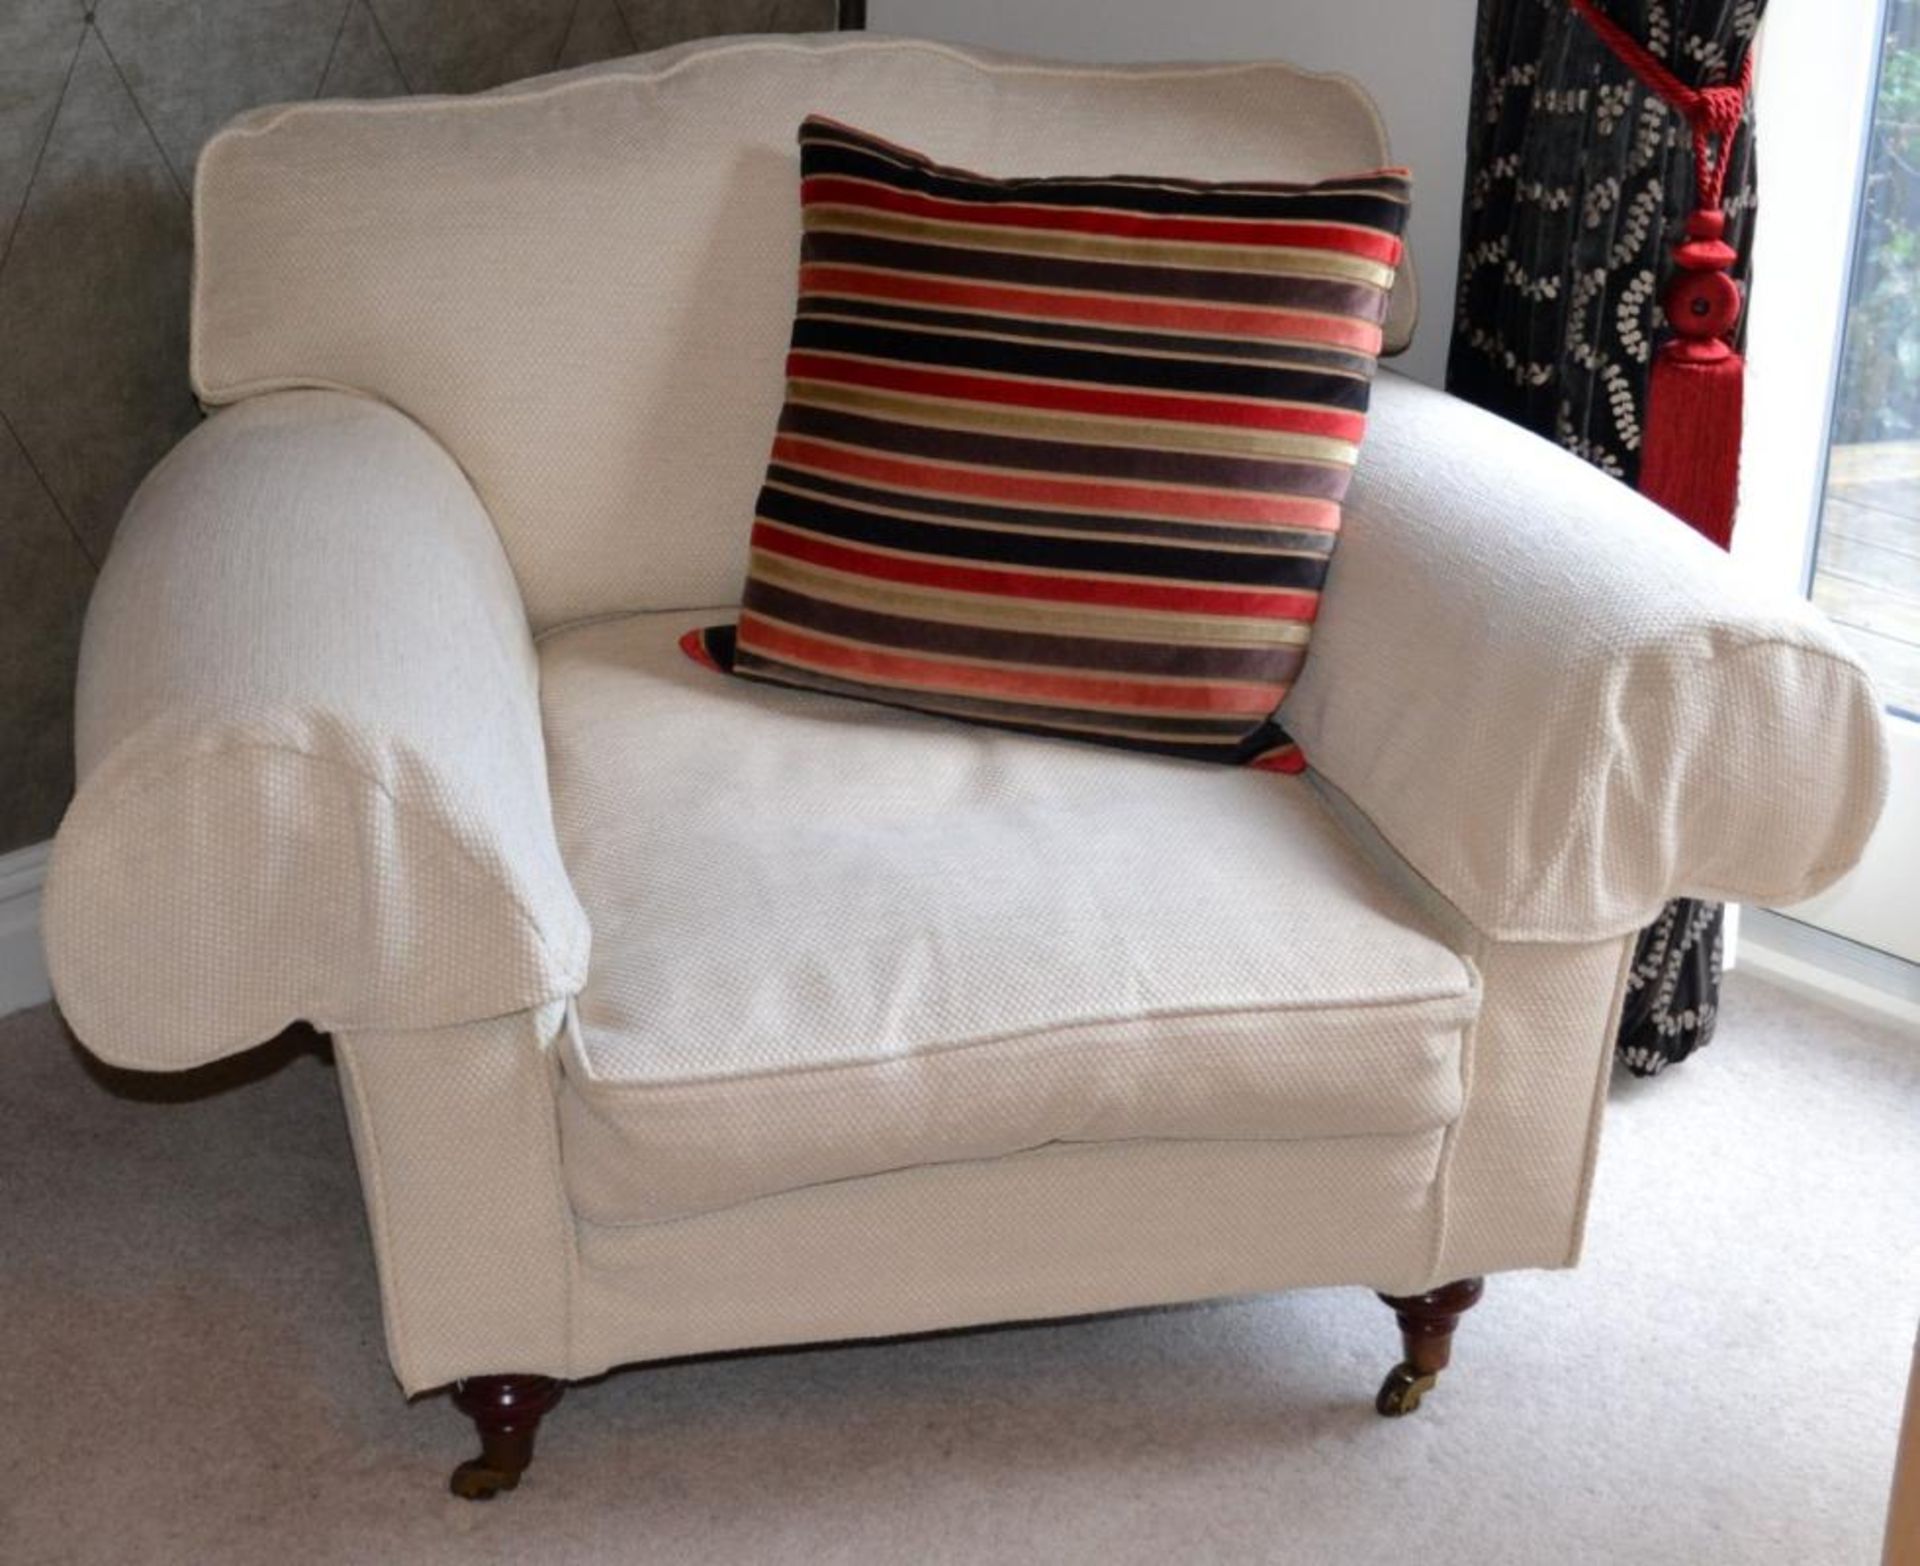 1 x Parker Knoll Armchair in Cream With Arm Protectors - CL275 - Location: Altrincham WA14 *NO VAT O